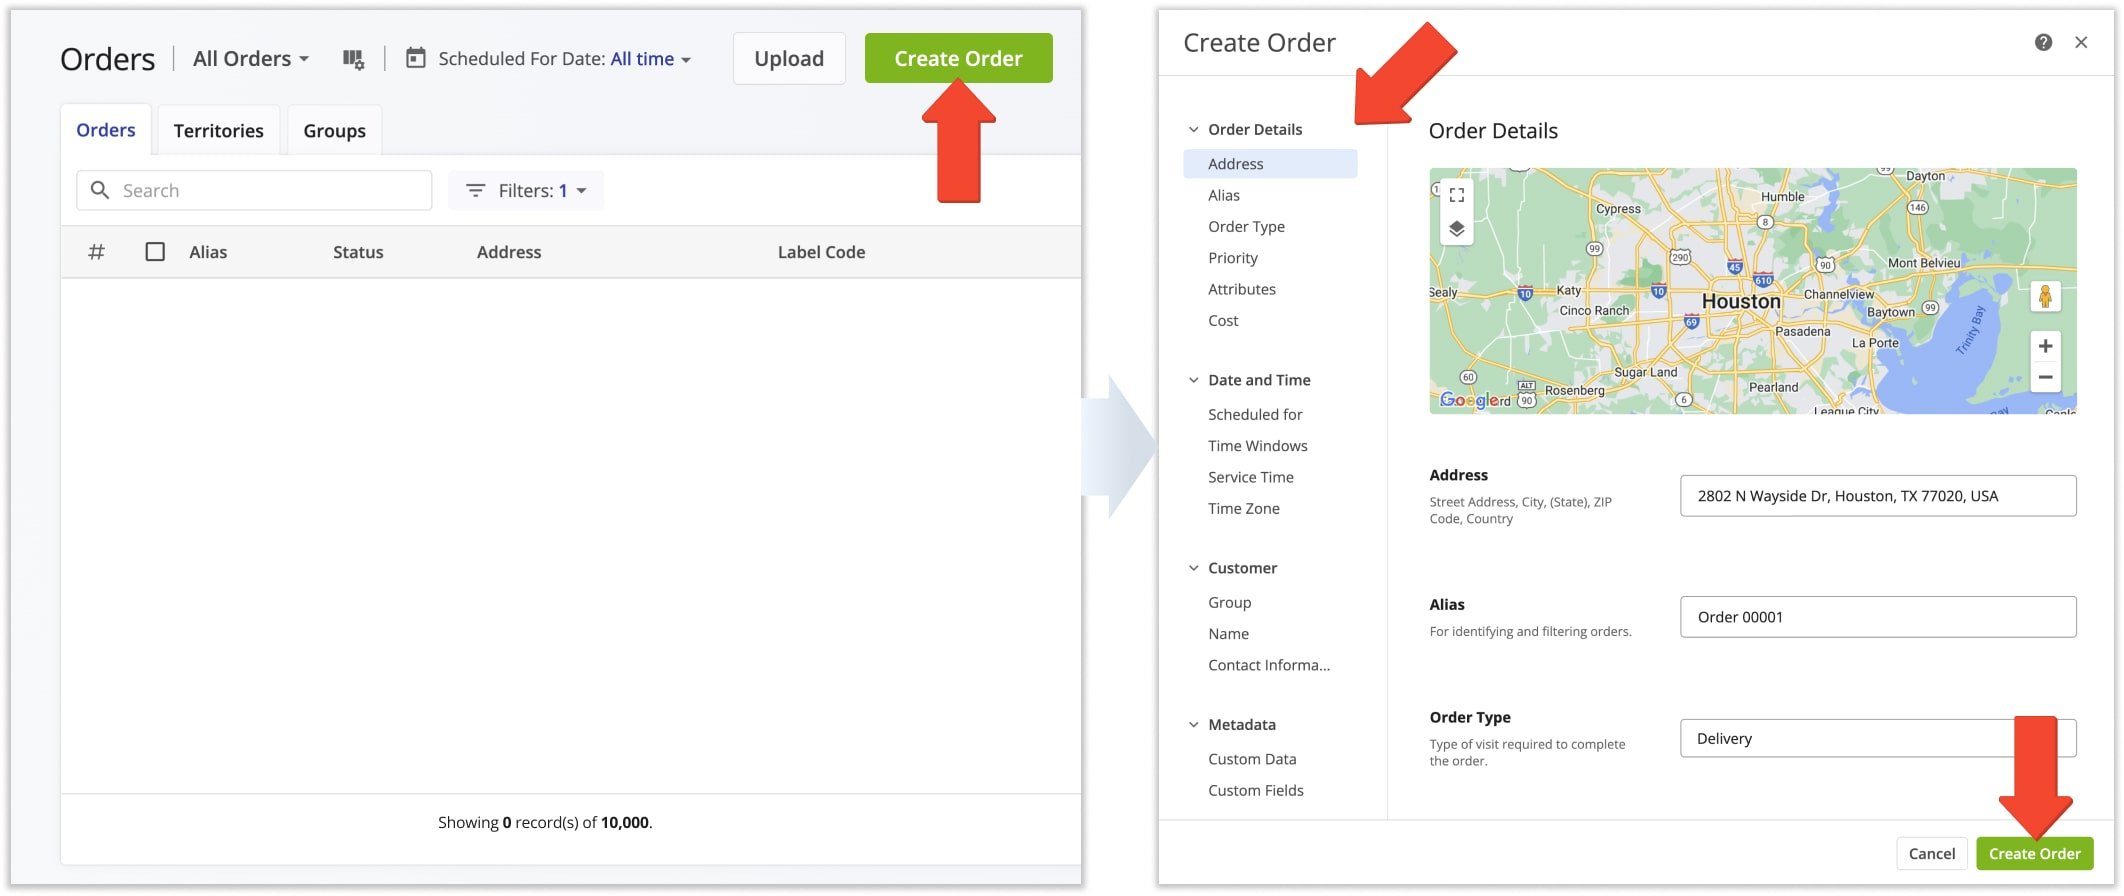 When you manually add customized orders in the Orders List, you can adjust order details such as address, scheduled for date, order destination type, priority, and more.